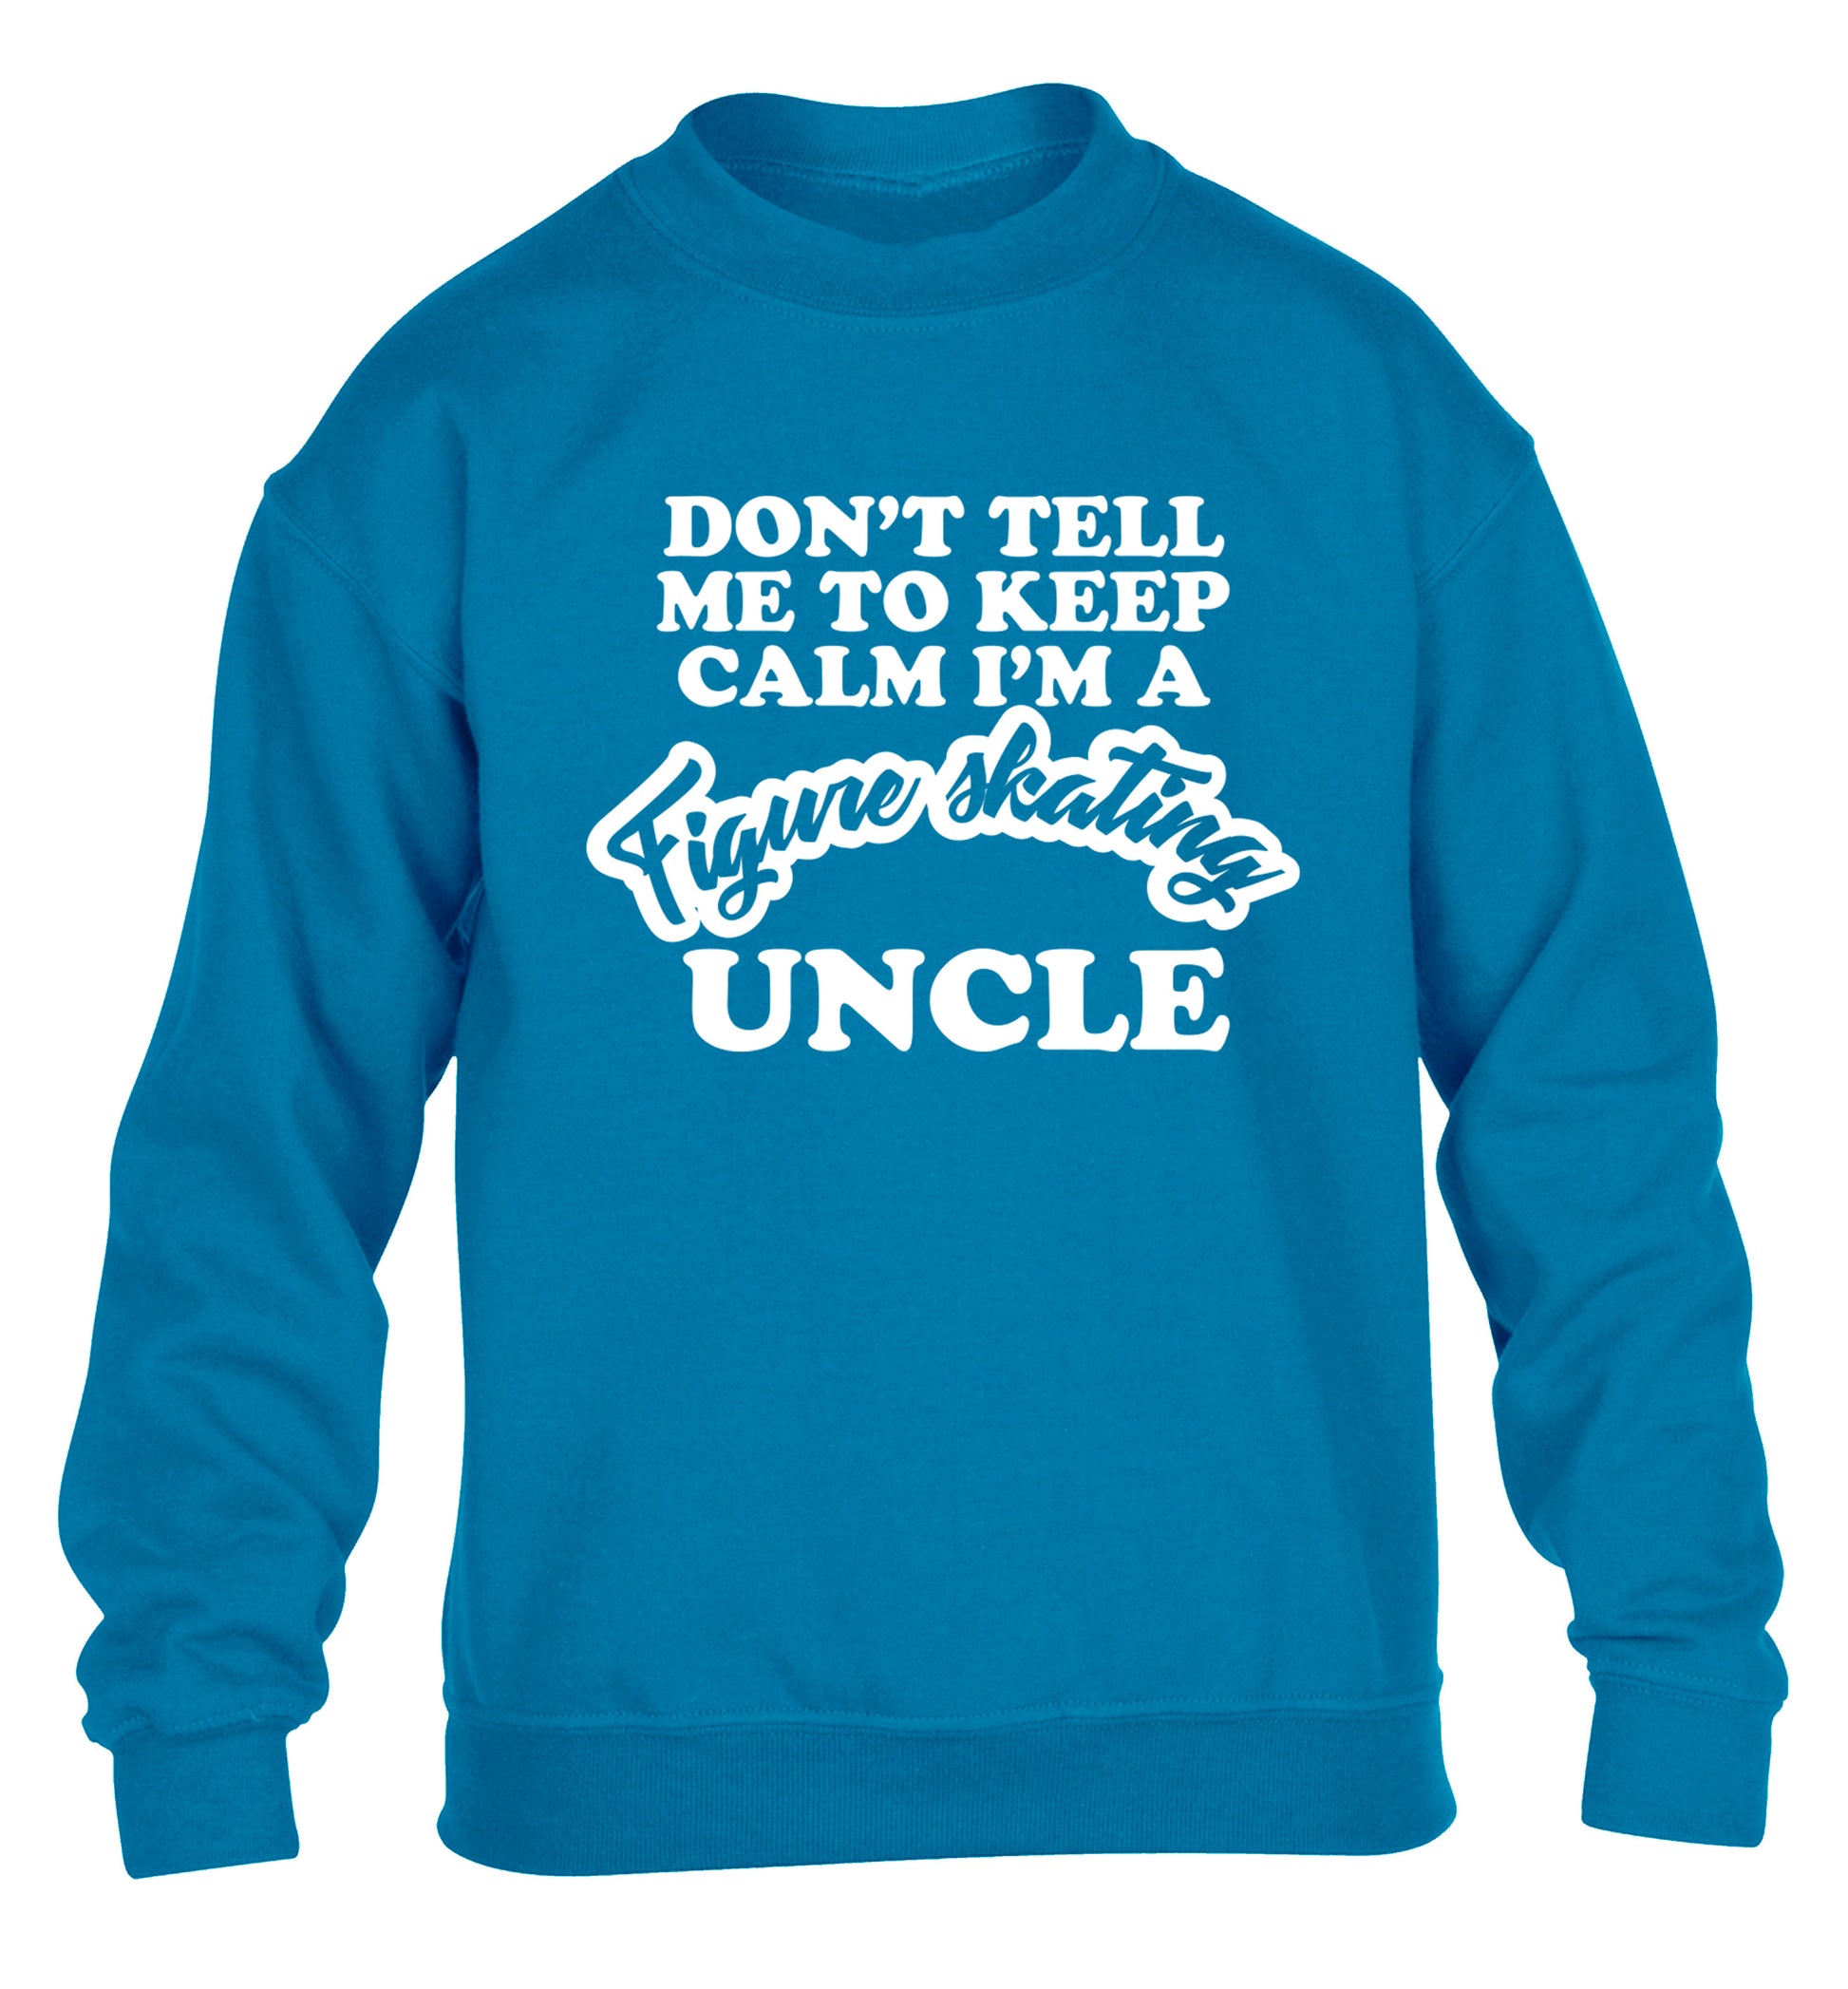 Don't tell me to keep calm I'm a figure skating uncle children's blue sweater 12-14 Years